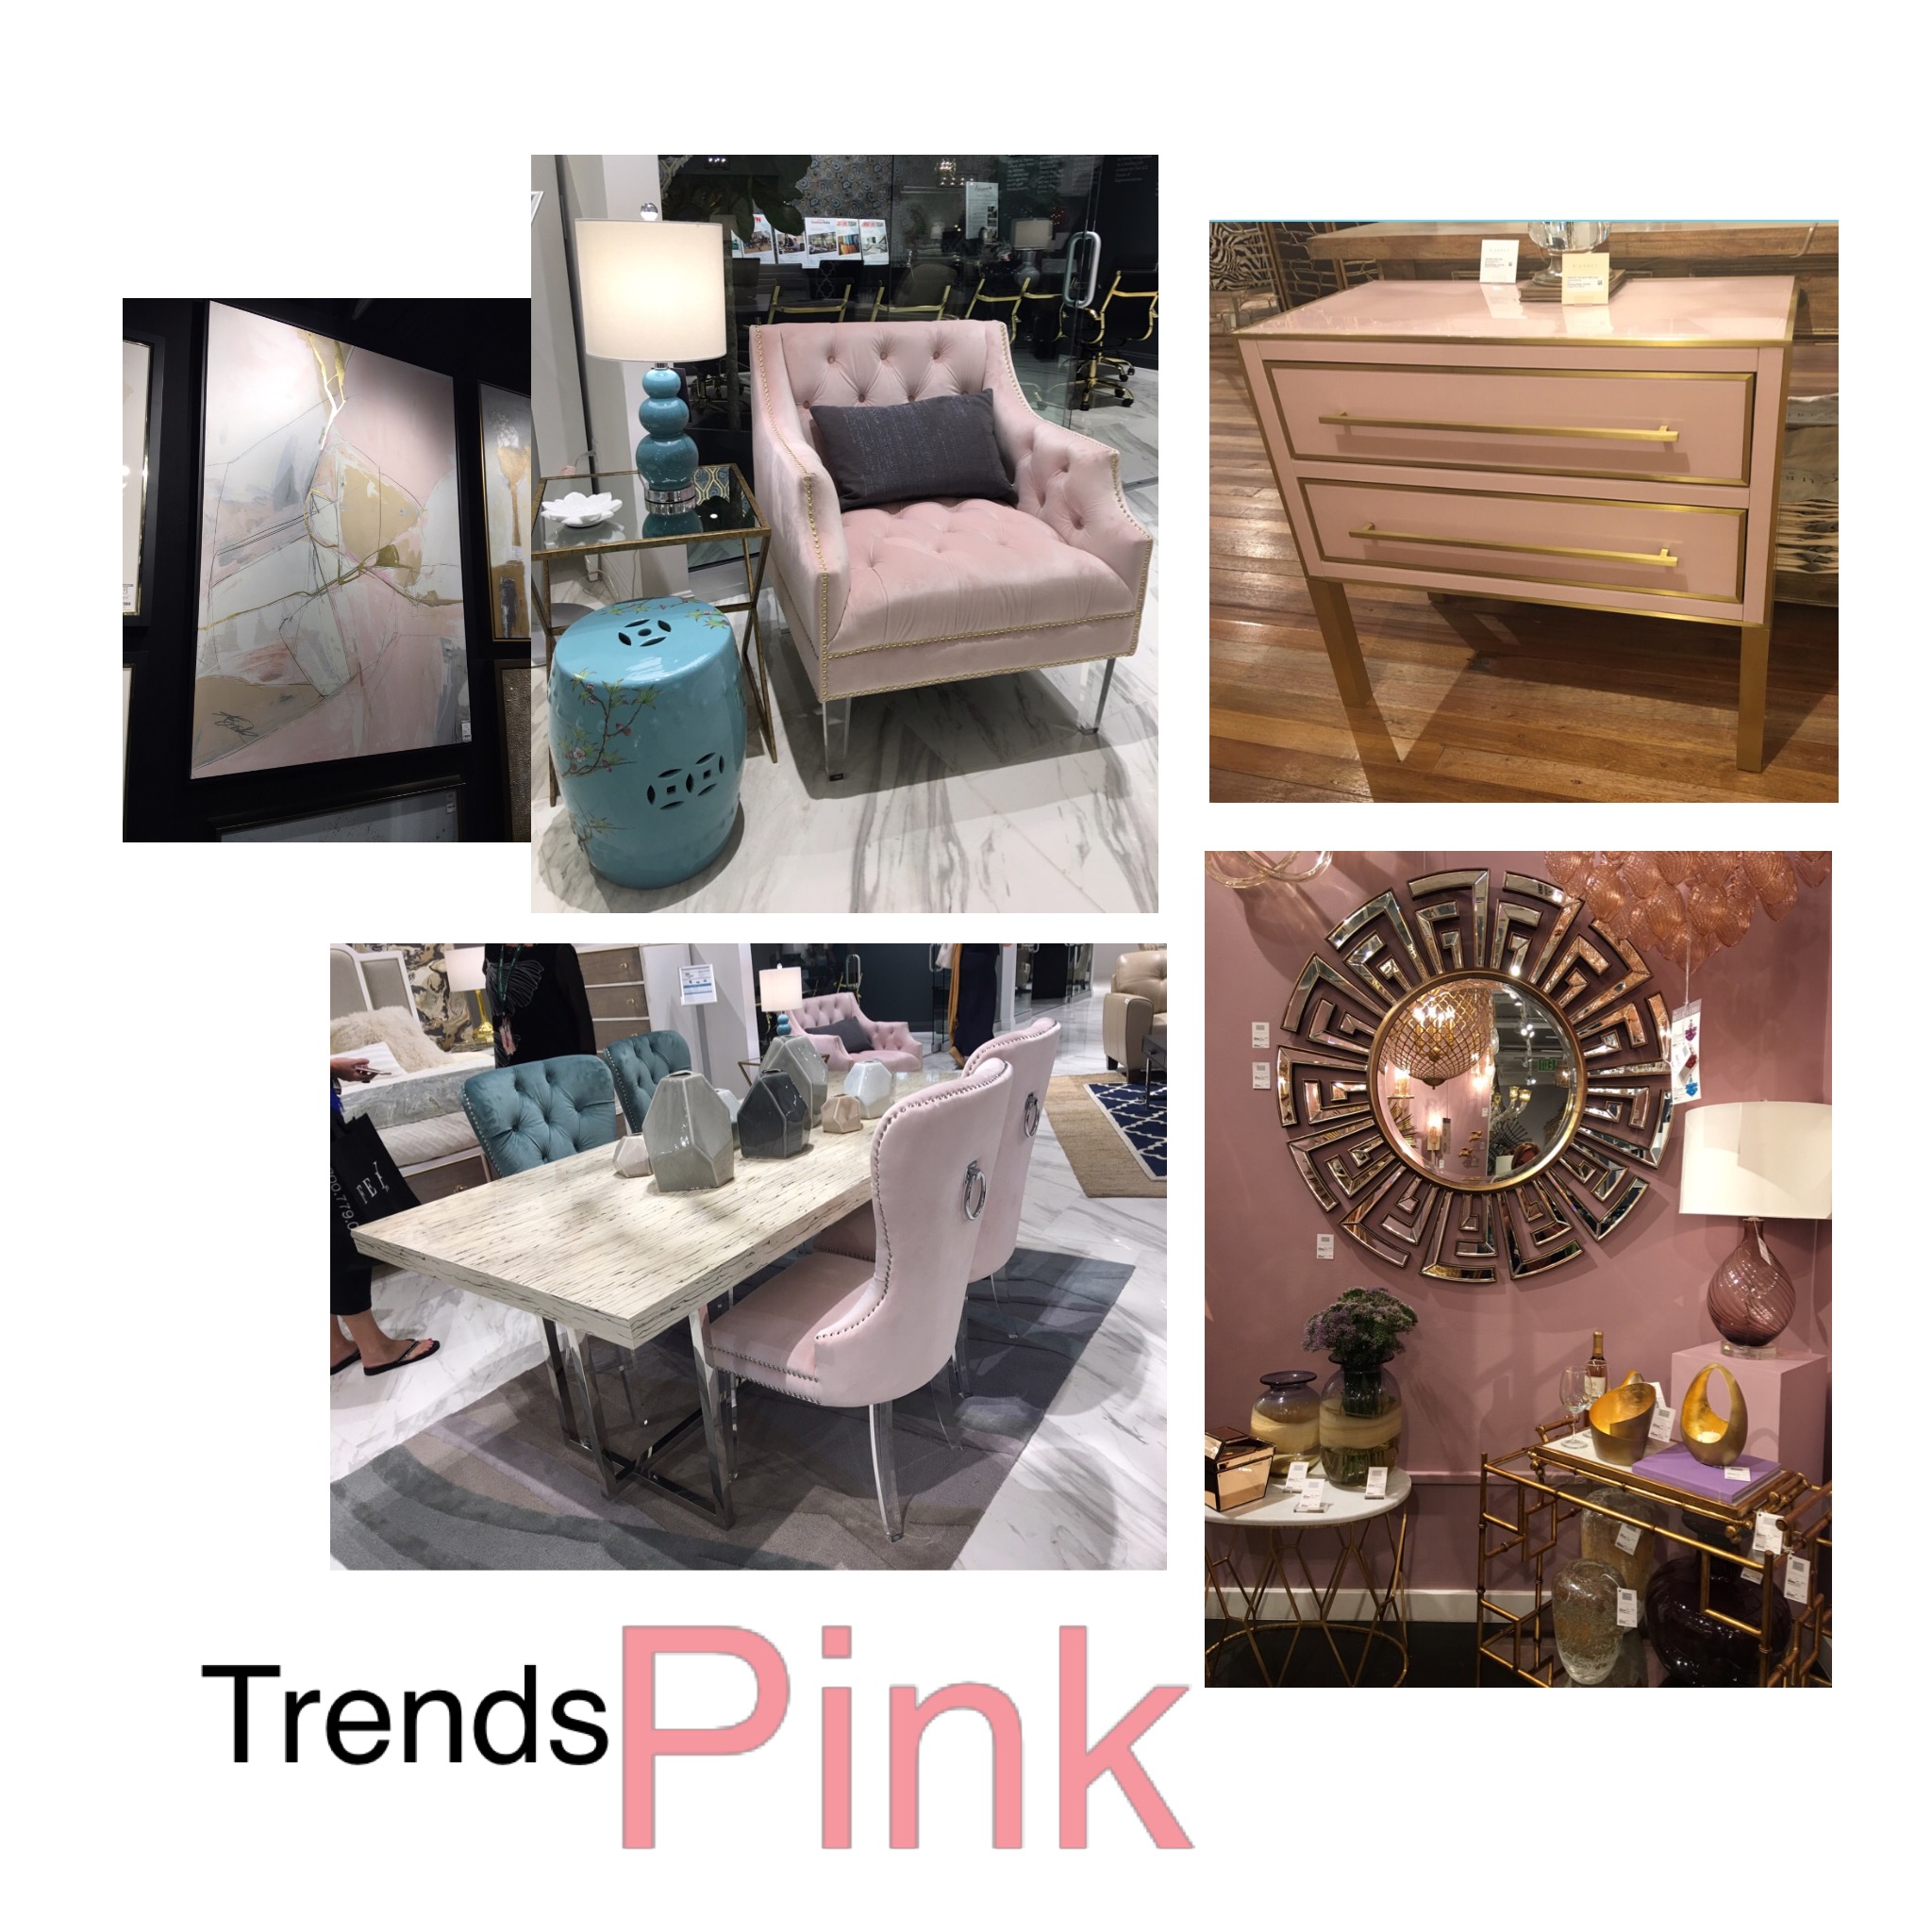 Outloud Pink Furnishings found at the LVMKT2017